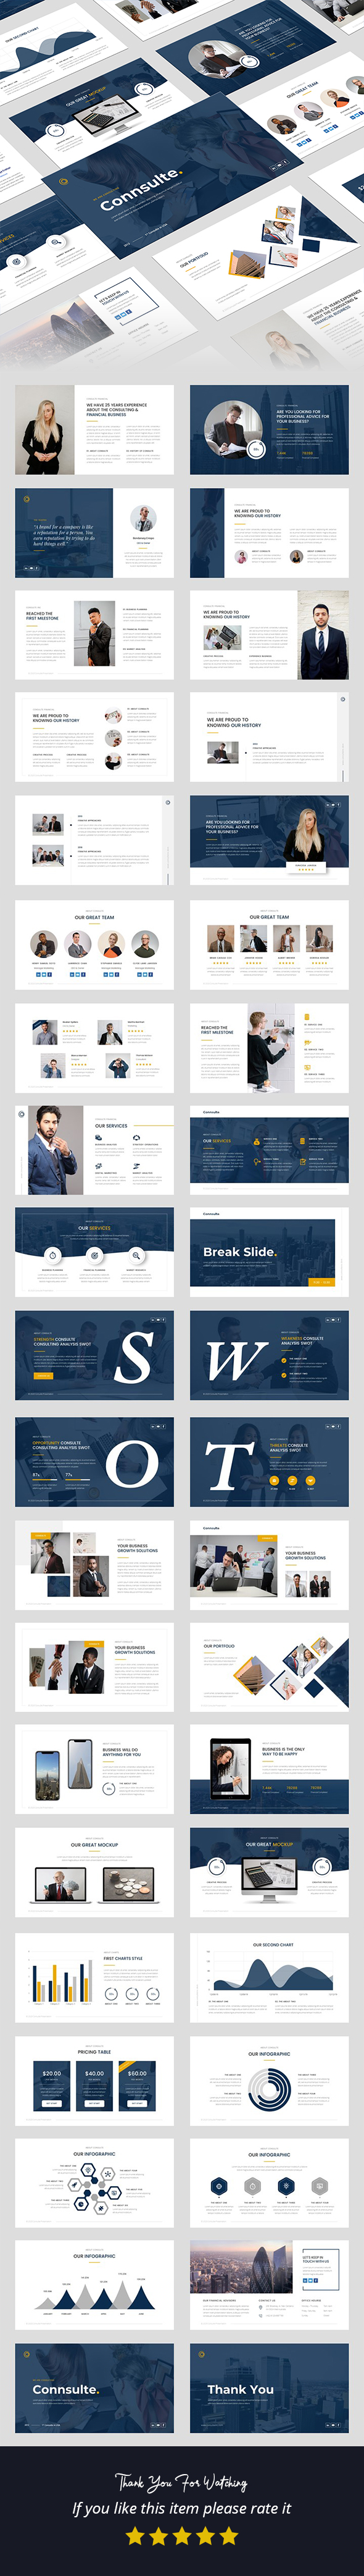 Consulte - Consulting & Finance PowerPoint Template